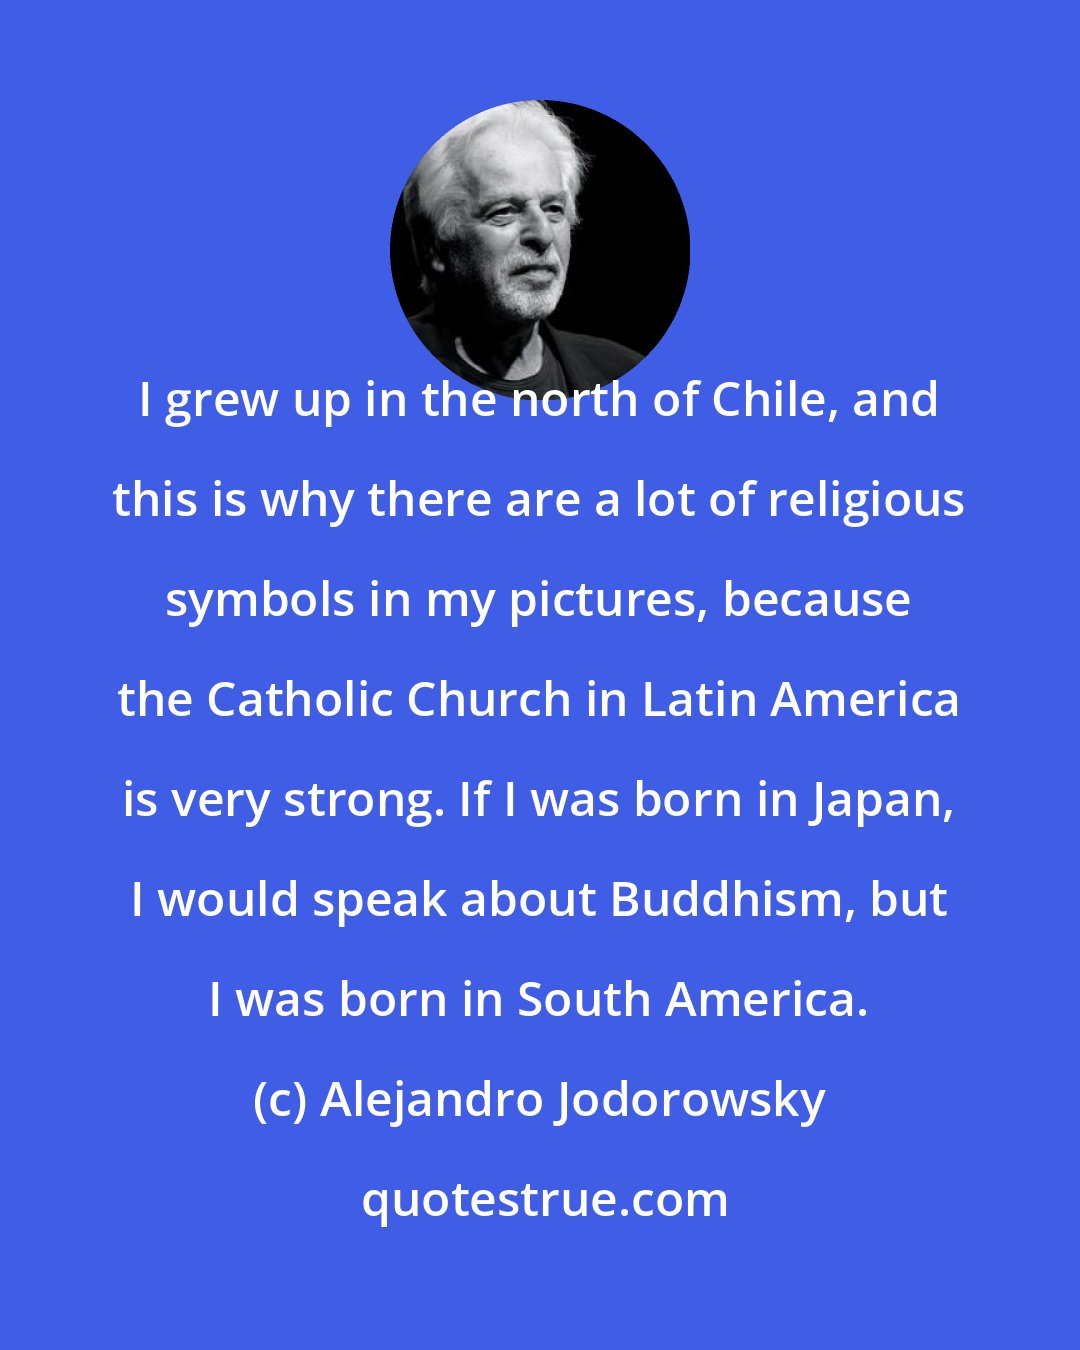 Alejandro Jodorowsky: I grew up in the north of Chile, and this is why there are a lot of religious symbols in my pictures, because the Catholic Church in Latin America is very strong. If I was born in Japan, I would speak about Buddhism, but I was born in South America.